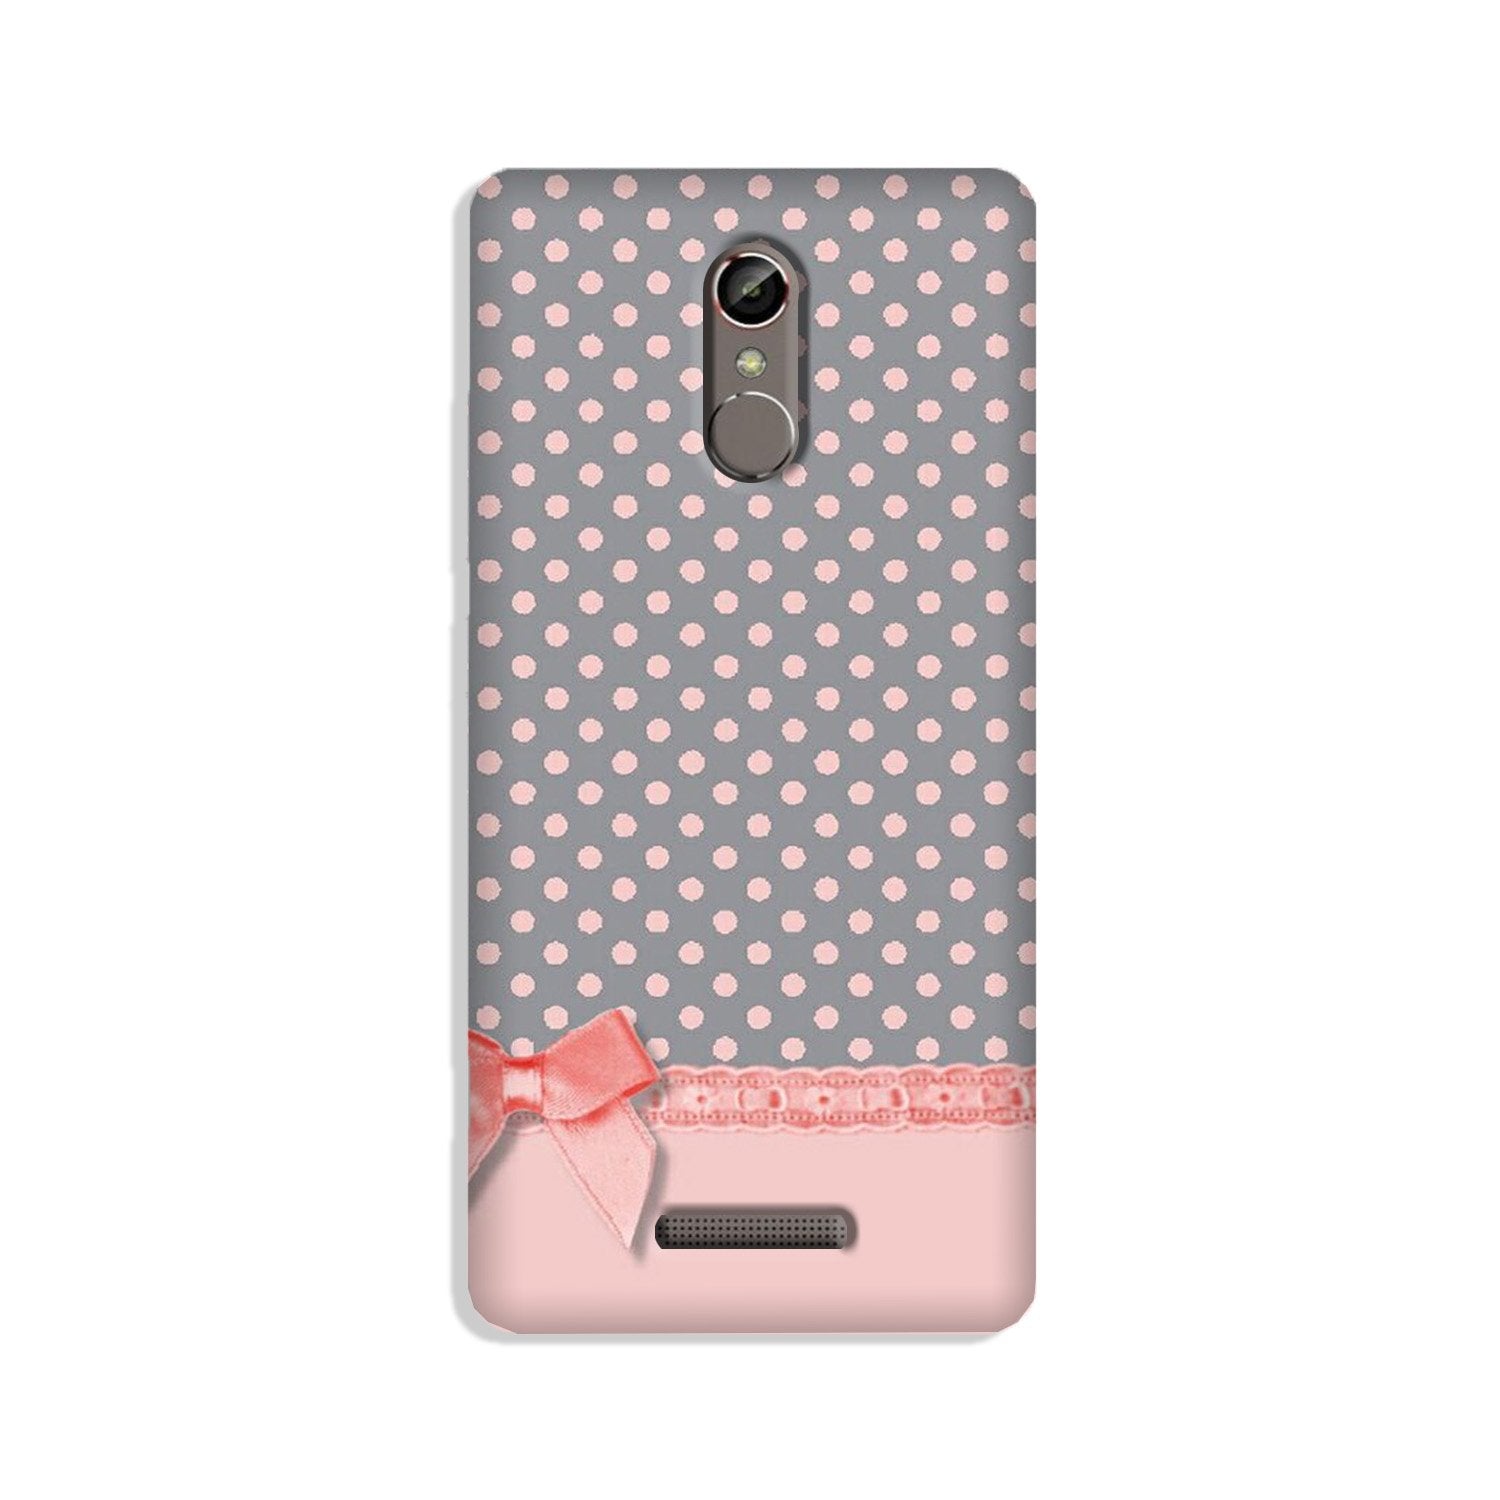 Gift Wrap2 Case for Gionee S6s